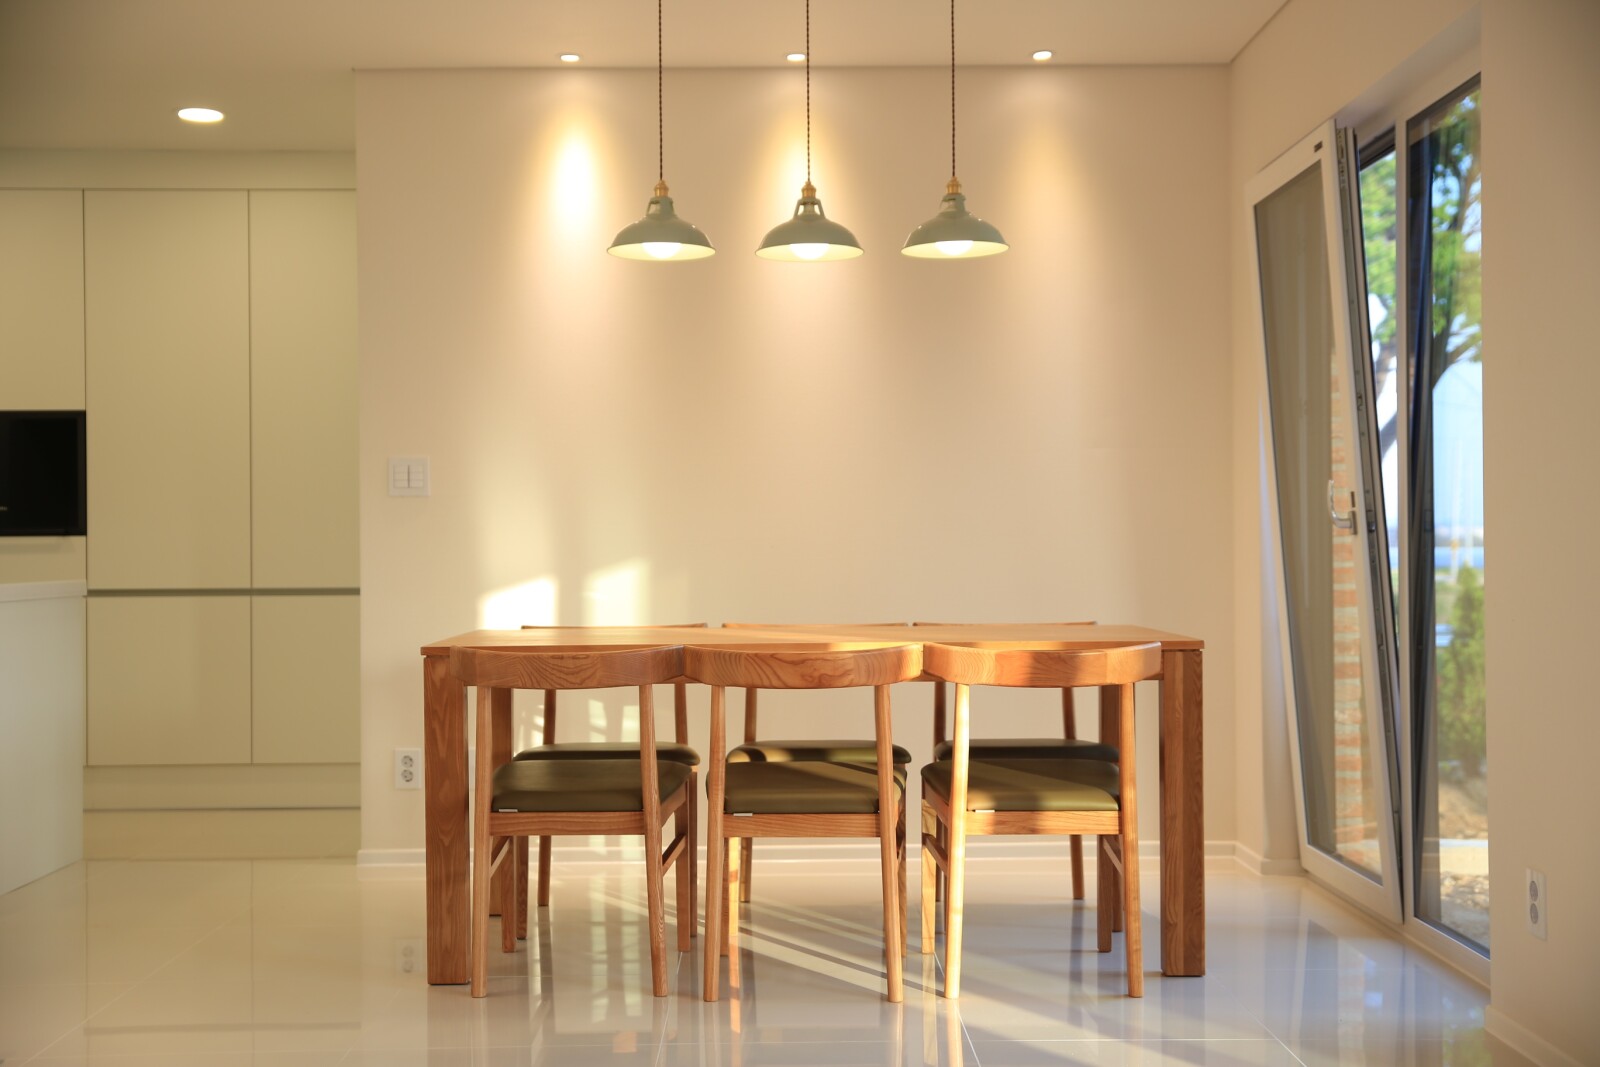 Tips for Choosing Dining Room Lighting That Will Make Meals More Enjoyable